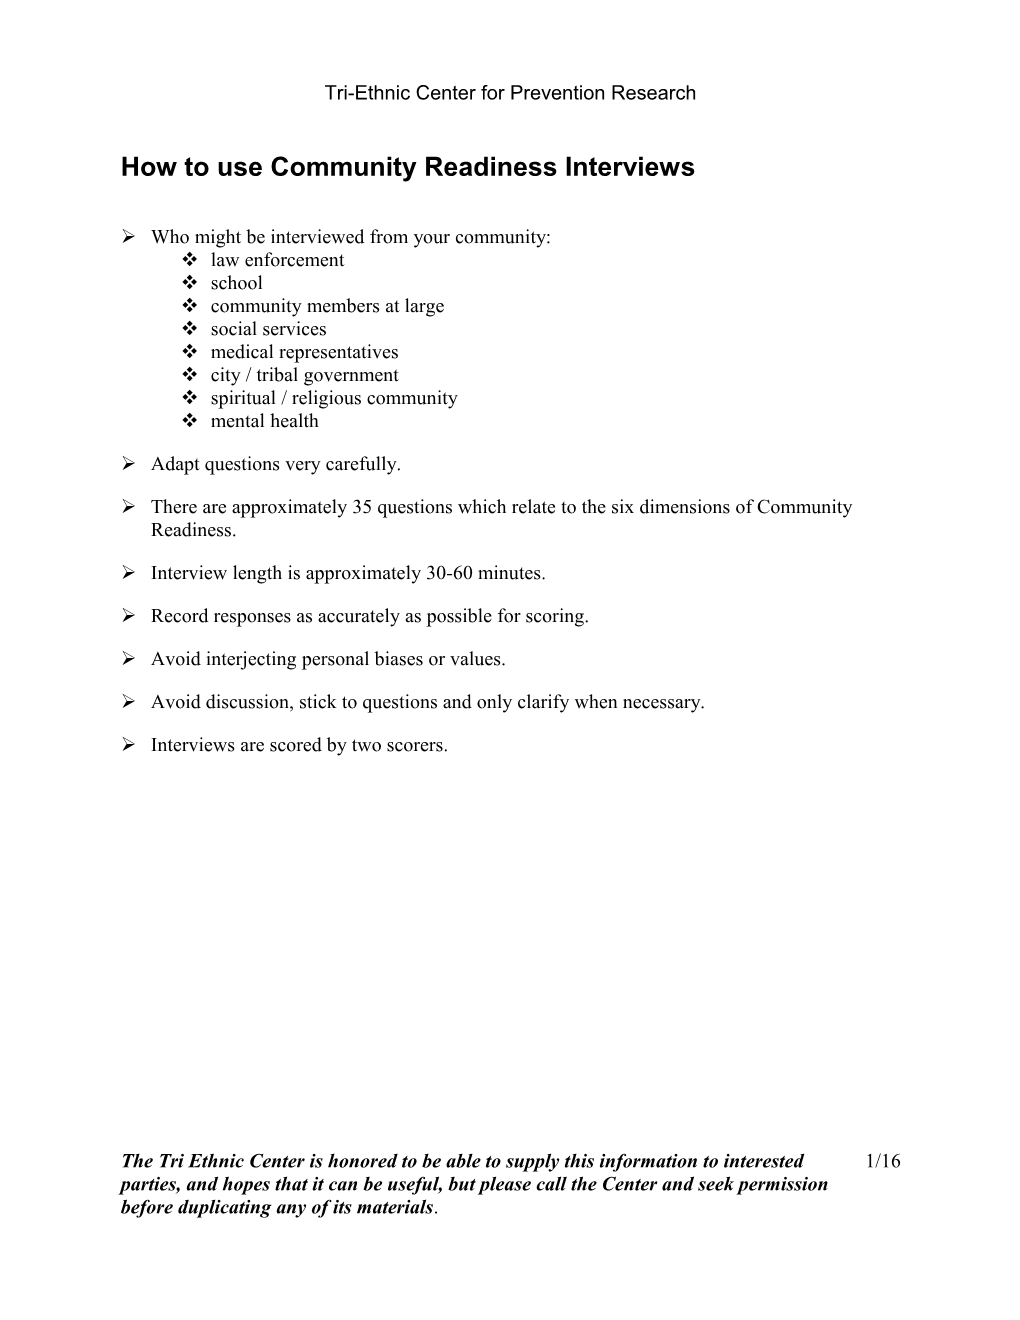 Community Readiness Questions